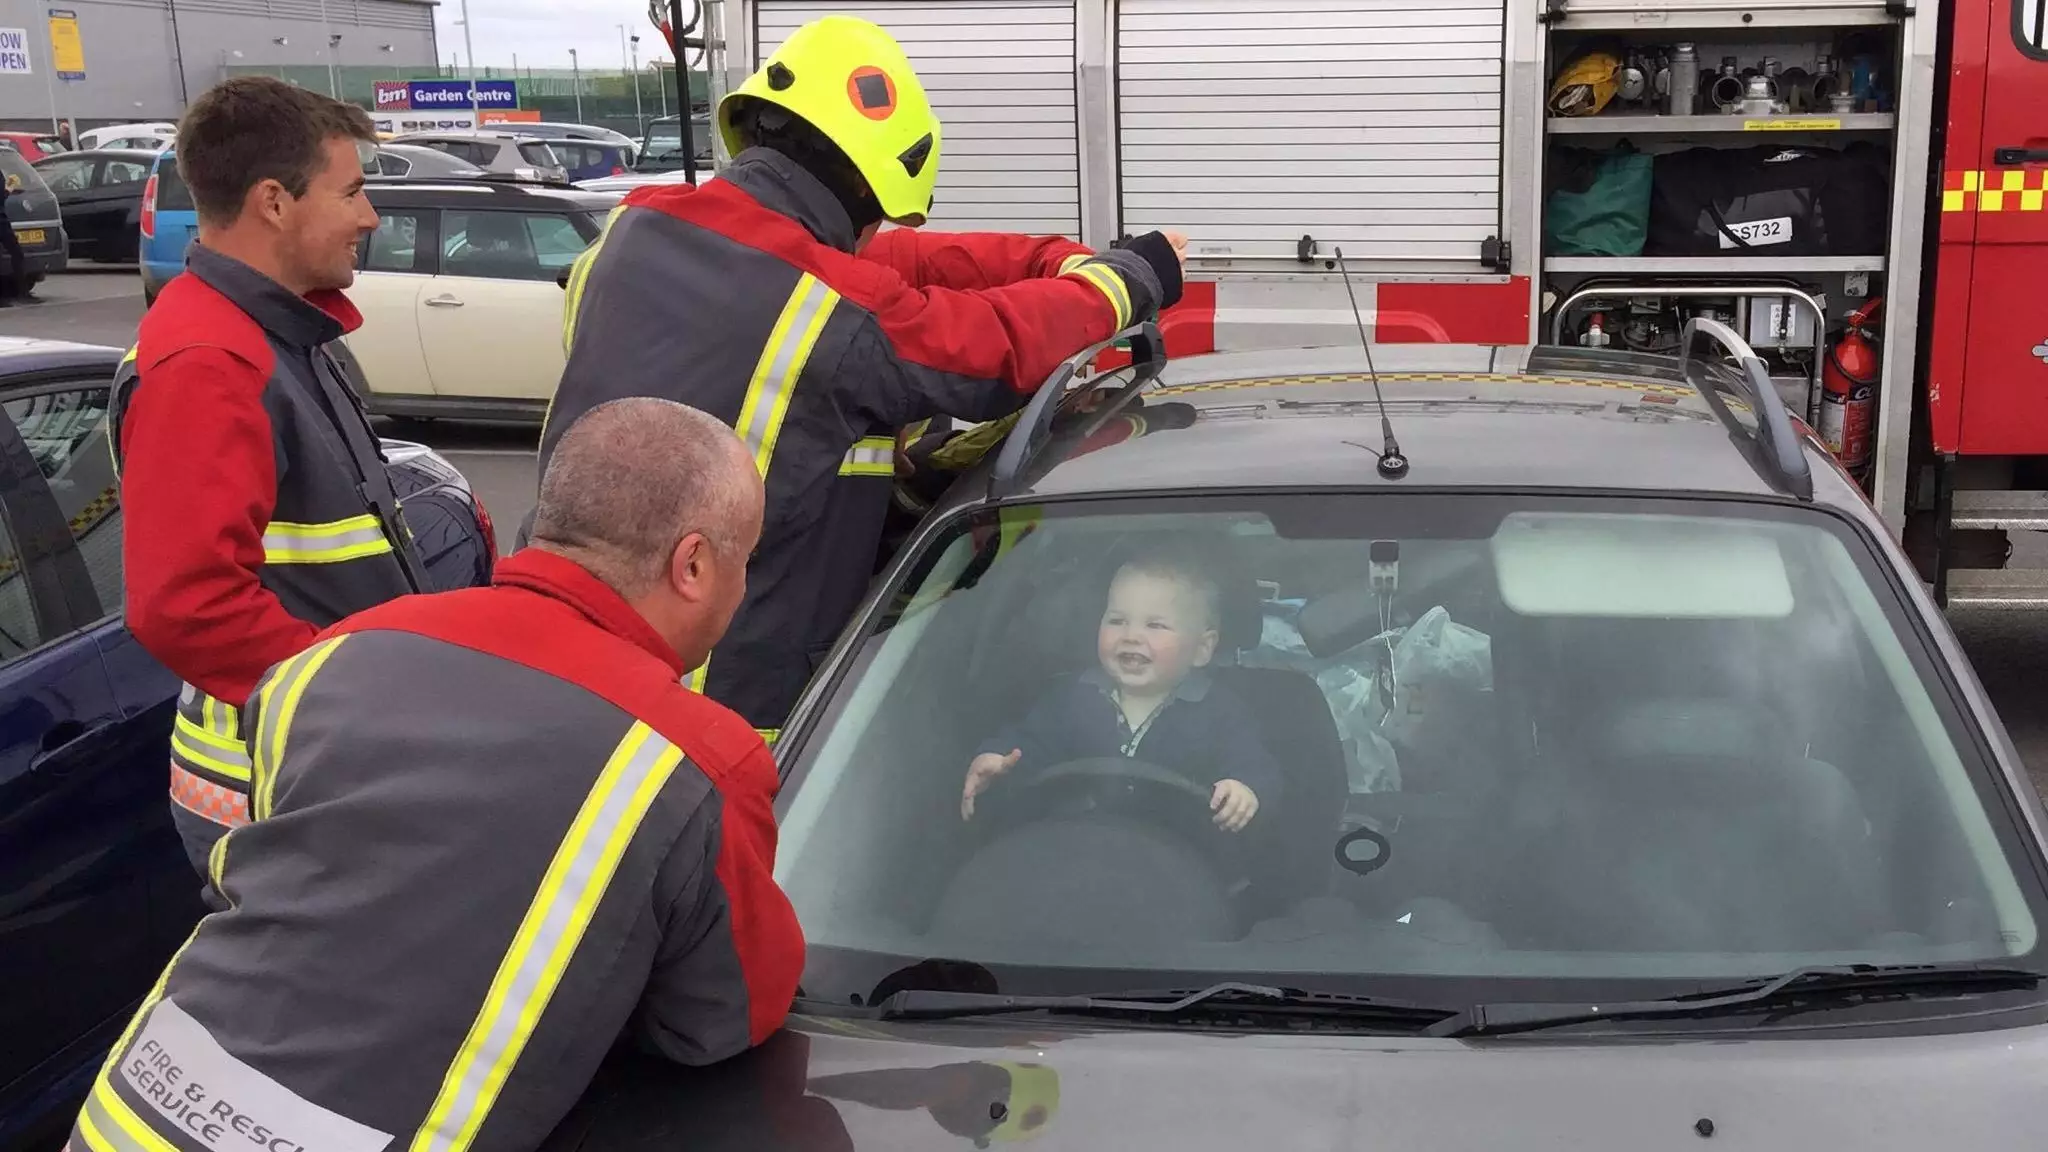 Toddler Accidentally Locked In Mum's Car Laughs As Rescuers Try To Free Him